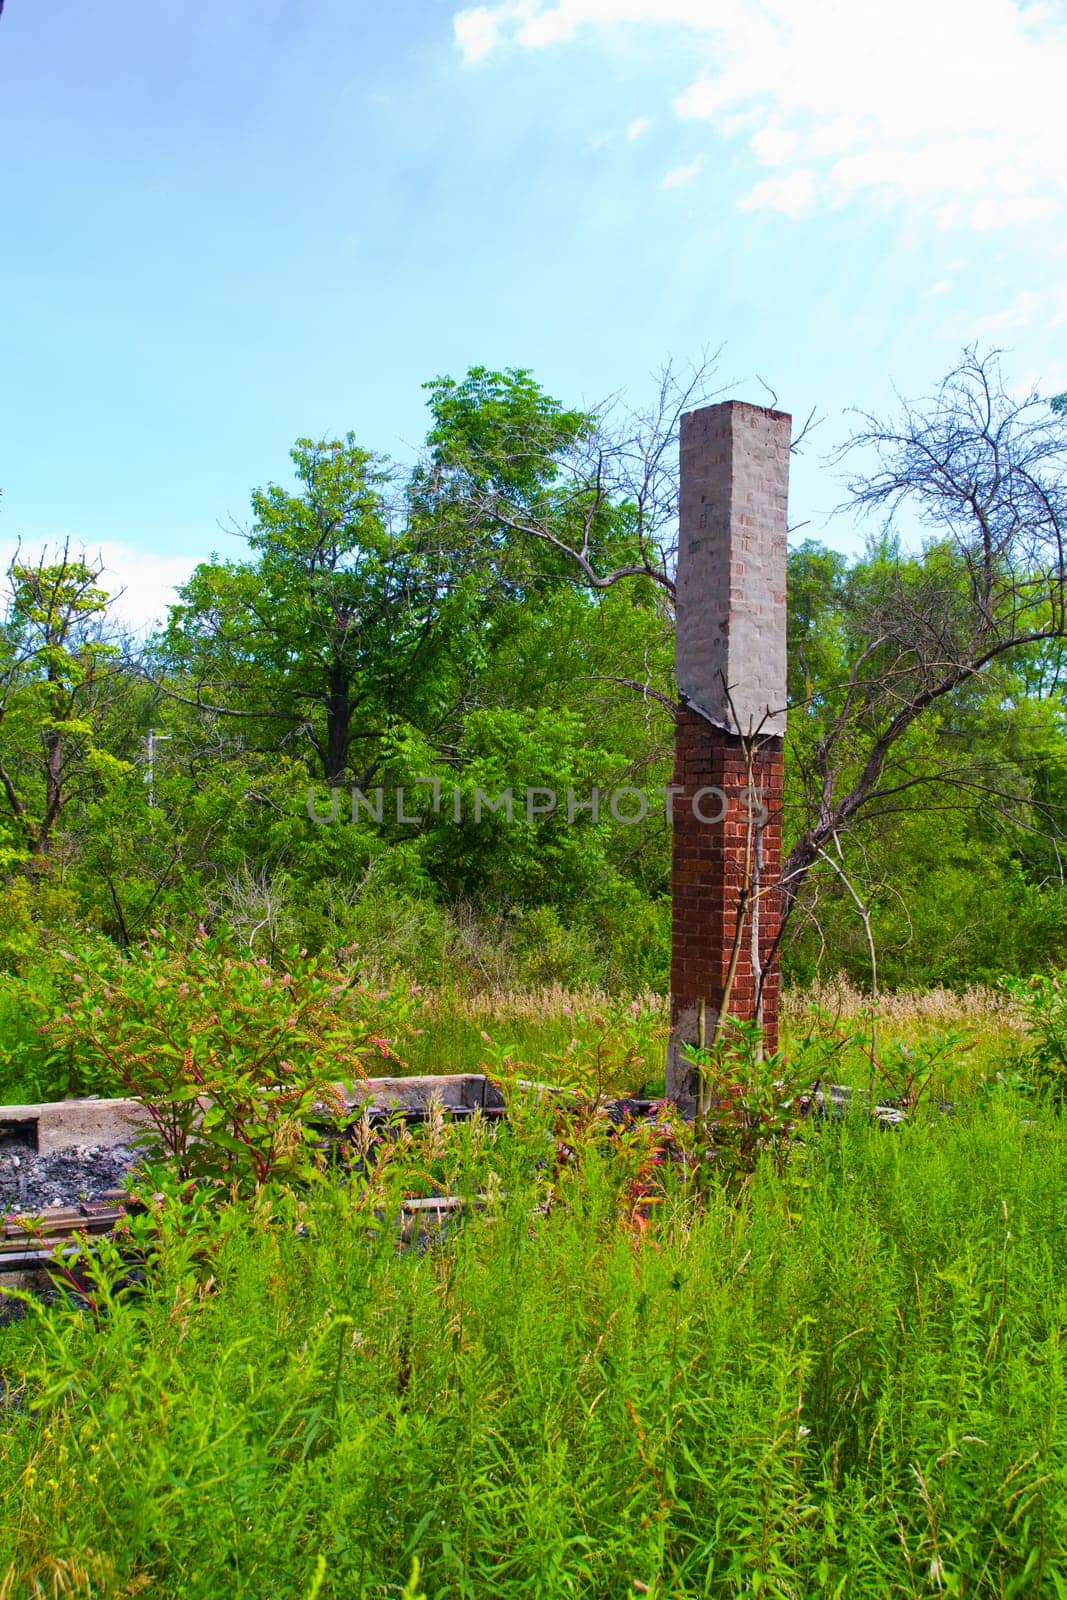 Nature's Reclamation: Forgotten industrial site in Lansing, Michigan, showcases an old brick chimney standing amidst an overgrown field. The resilient vegetation encroaches on remnants of human construction, symbolizing the power of nature.